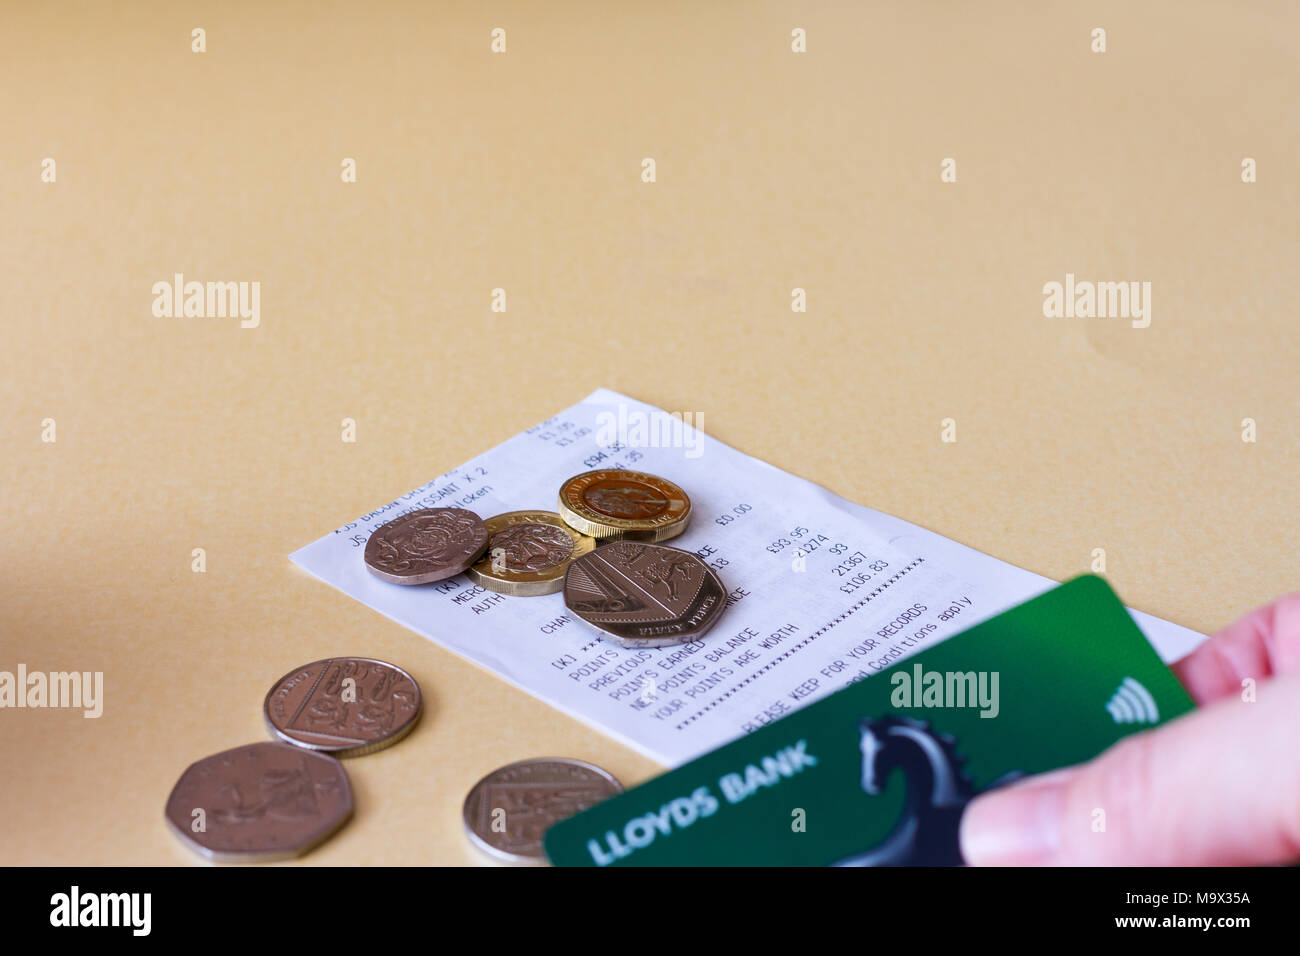 Shopping receipt with some cash coins & visa bank card, UK Stock Photo